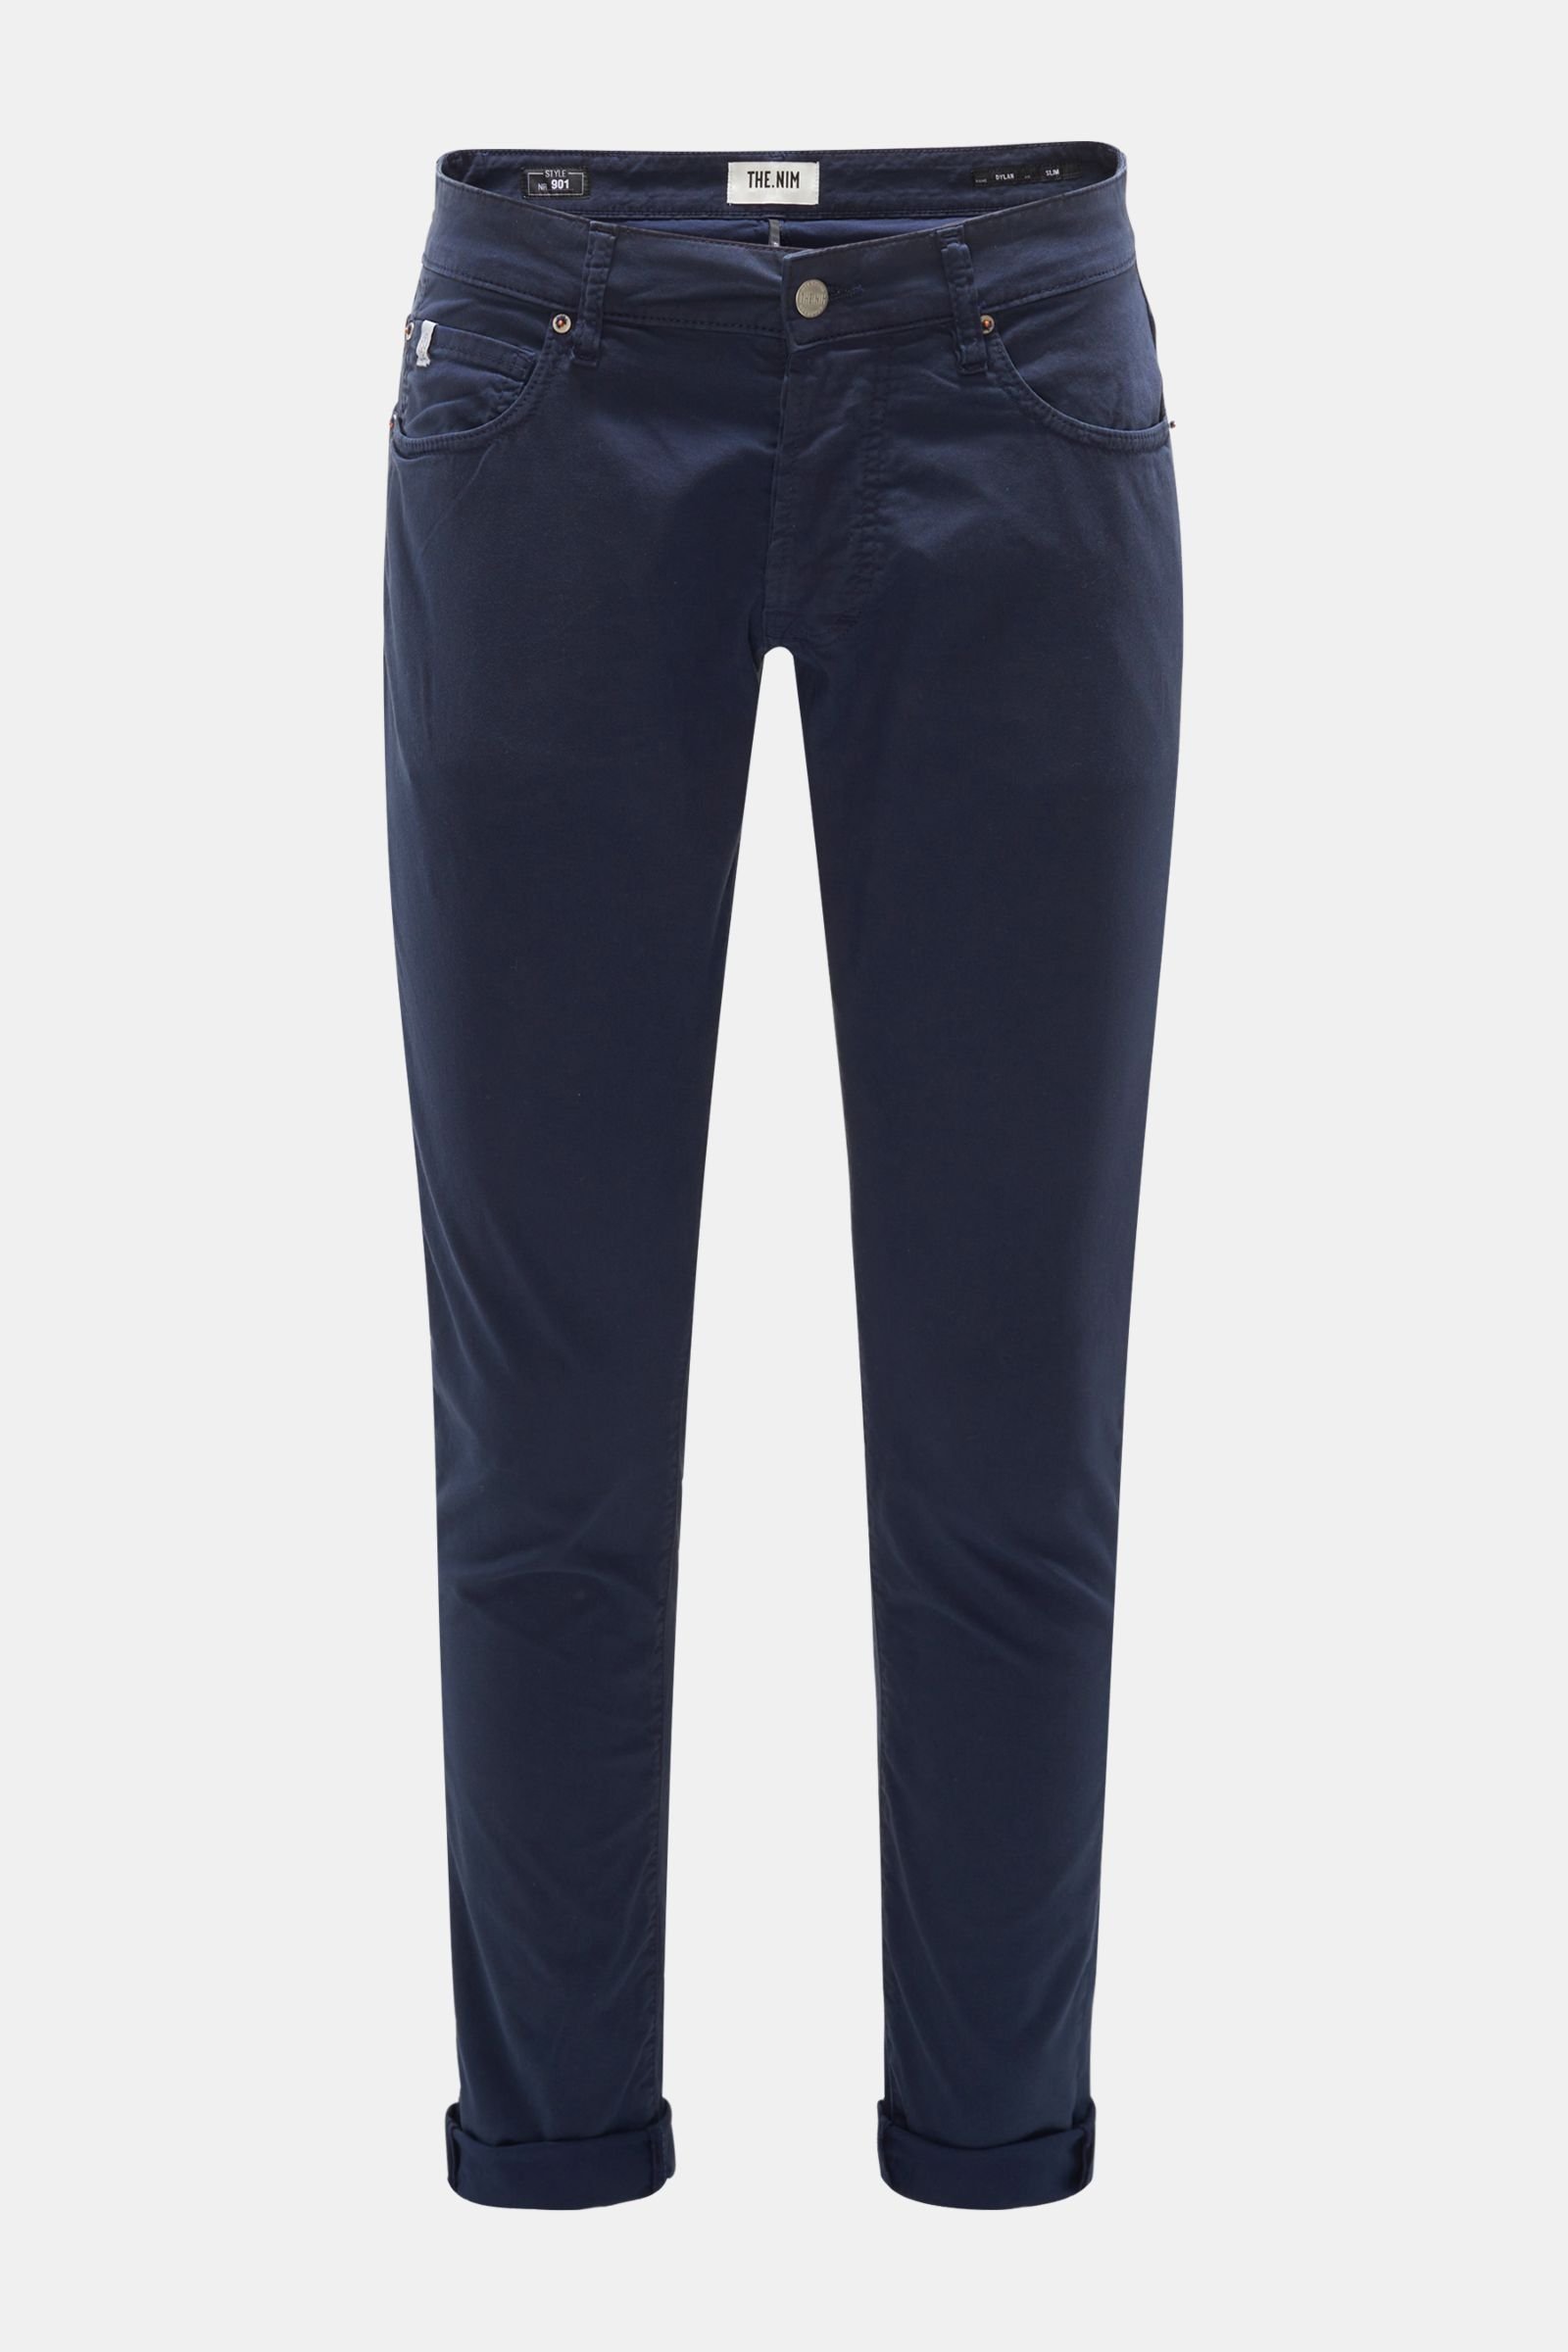 Trousers '901 Dylan Slim Fit' navy